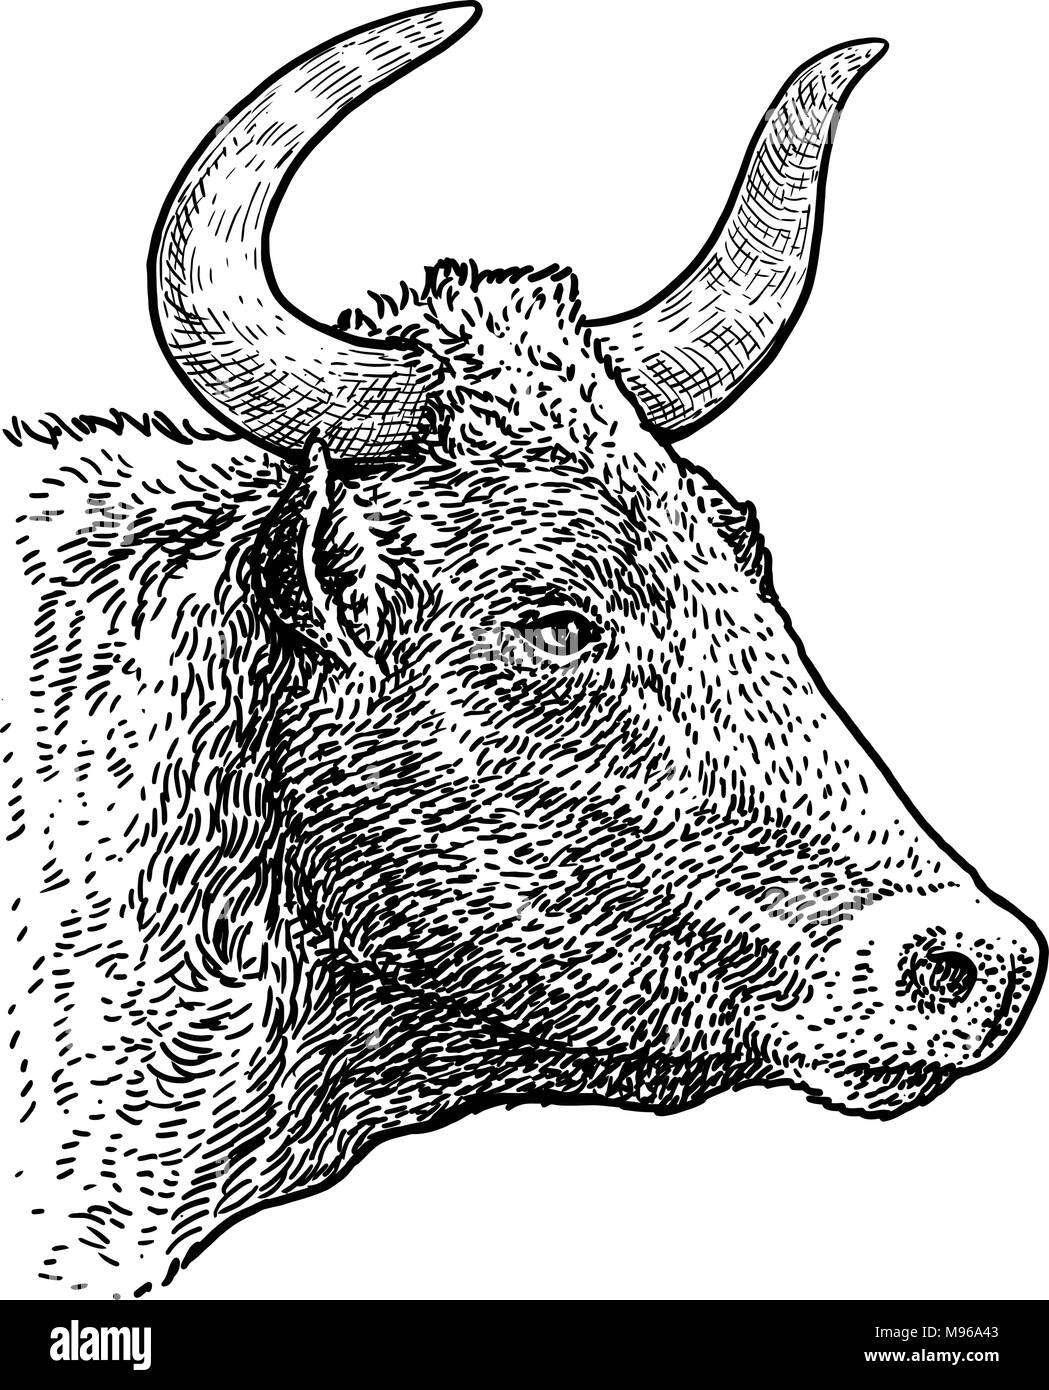 Cow Head Sketch. Bull Heads Engraving, Livestock Agriculture Cattle Food  Isolated Face Ink Vector Hand Drawing Stock Vector - Illustration of eyes,  graphic: 303644729